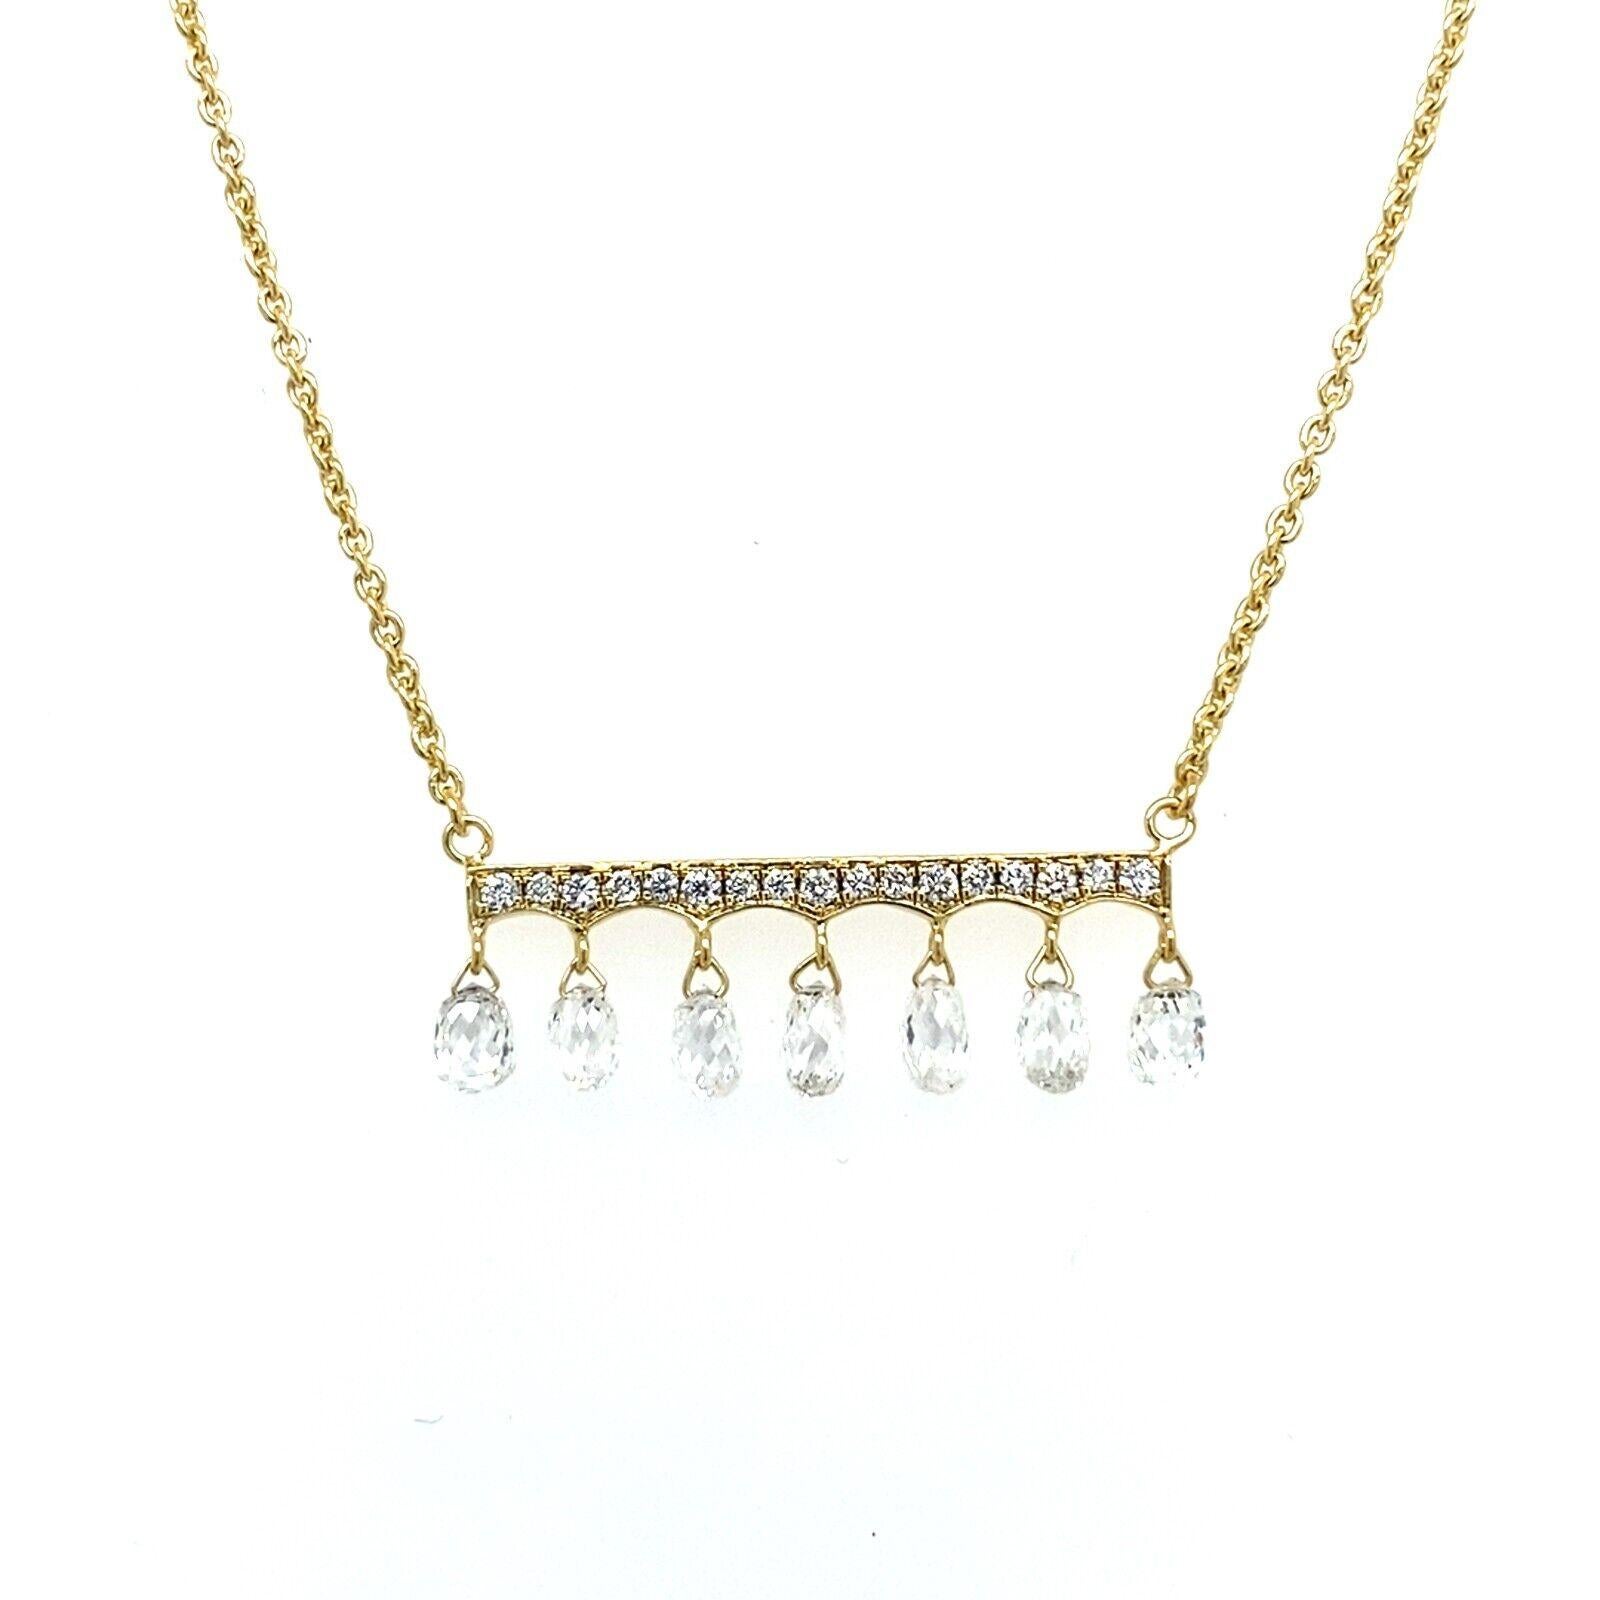 Natural Facetted Diamond Necklace with 1.0ct of Diamonds in 18ct Yellow Gold

This contemporary, elegant and beautiful necklace is made from 18ct Yellow Gold and features 7 natural pear drop Diamonds. Each rose cut Diamond drilled is set on pavee